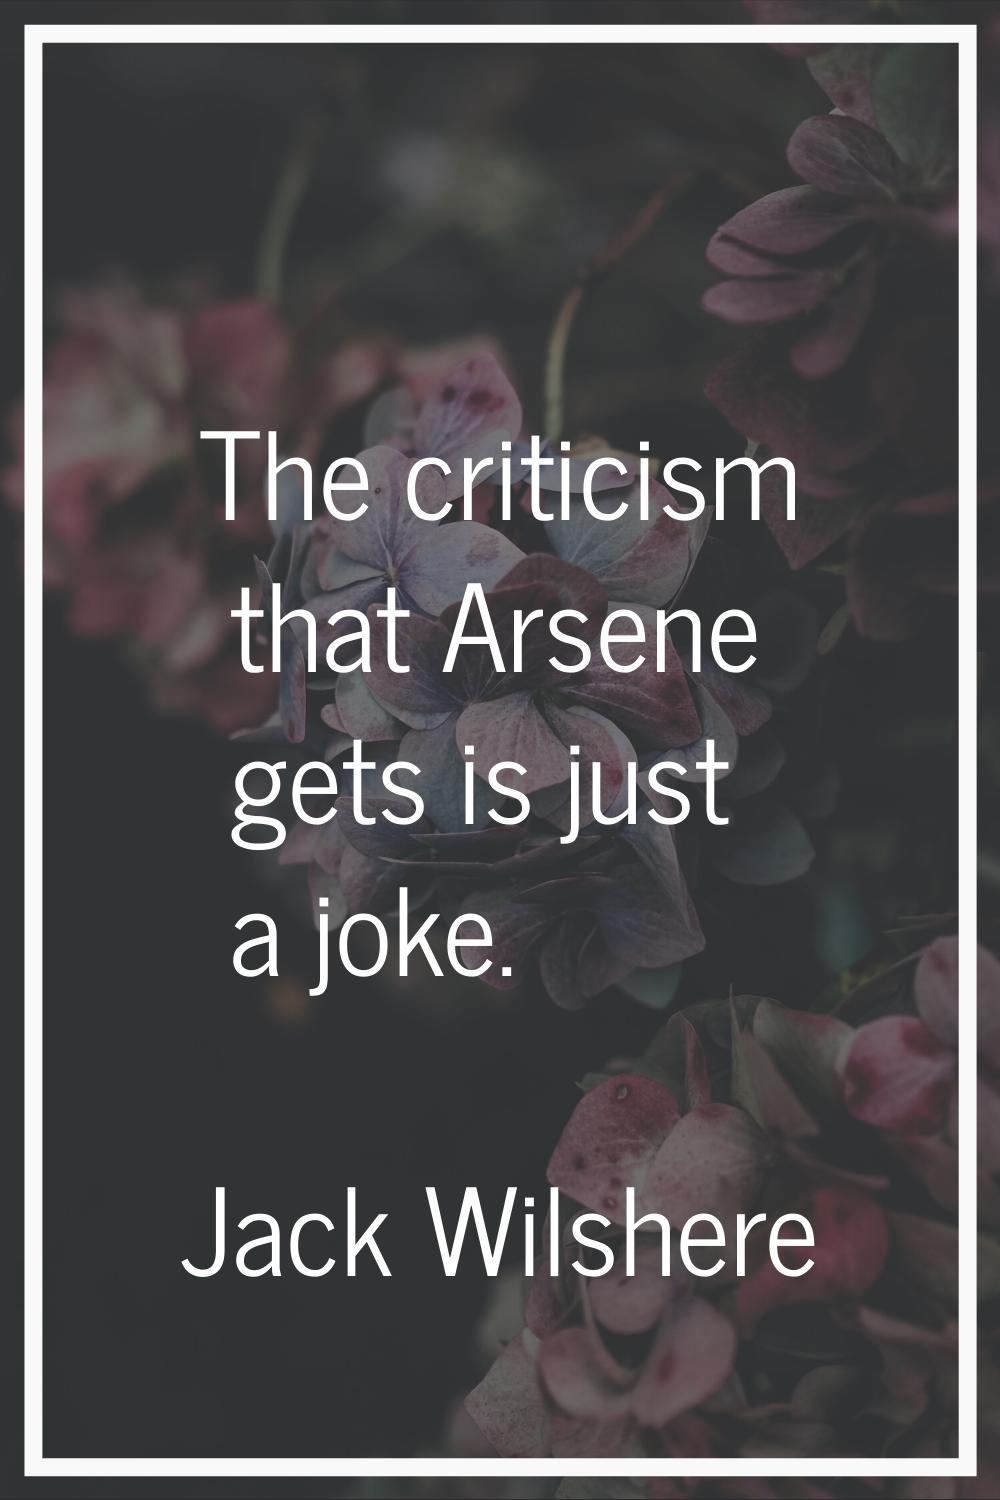 The criticism that Arsene gets is just a joke.